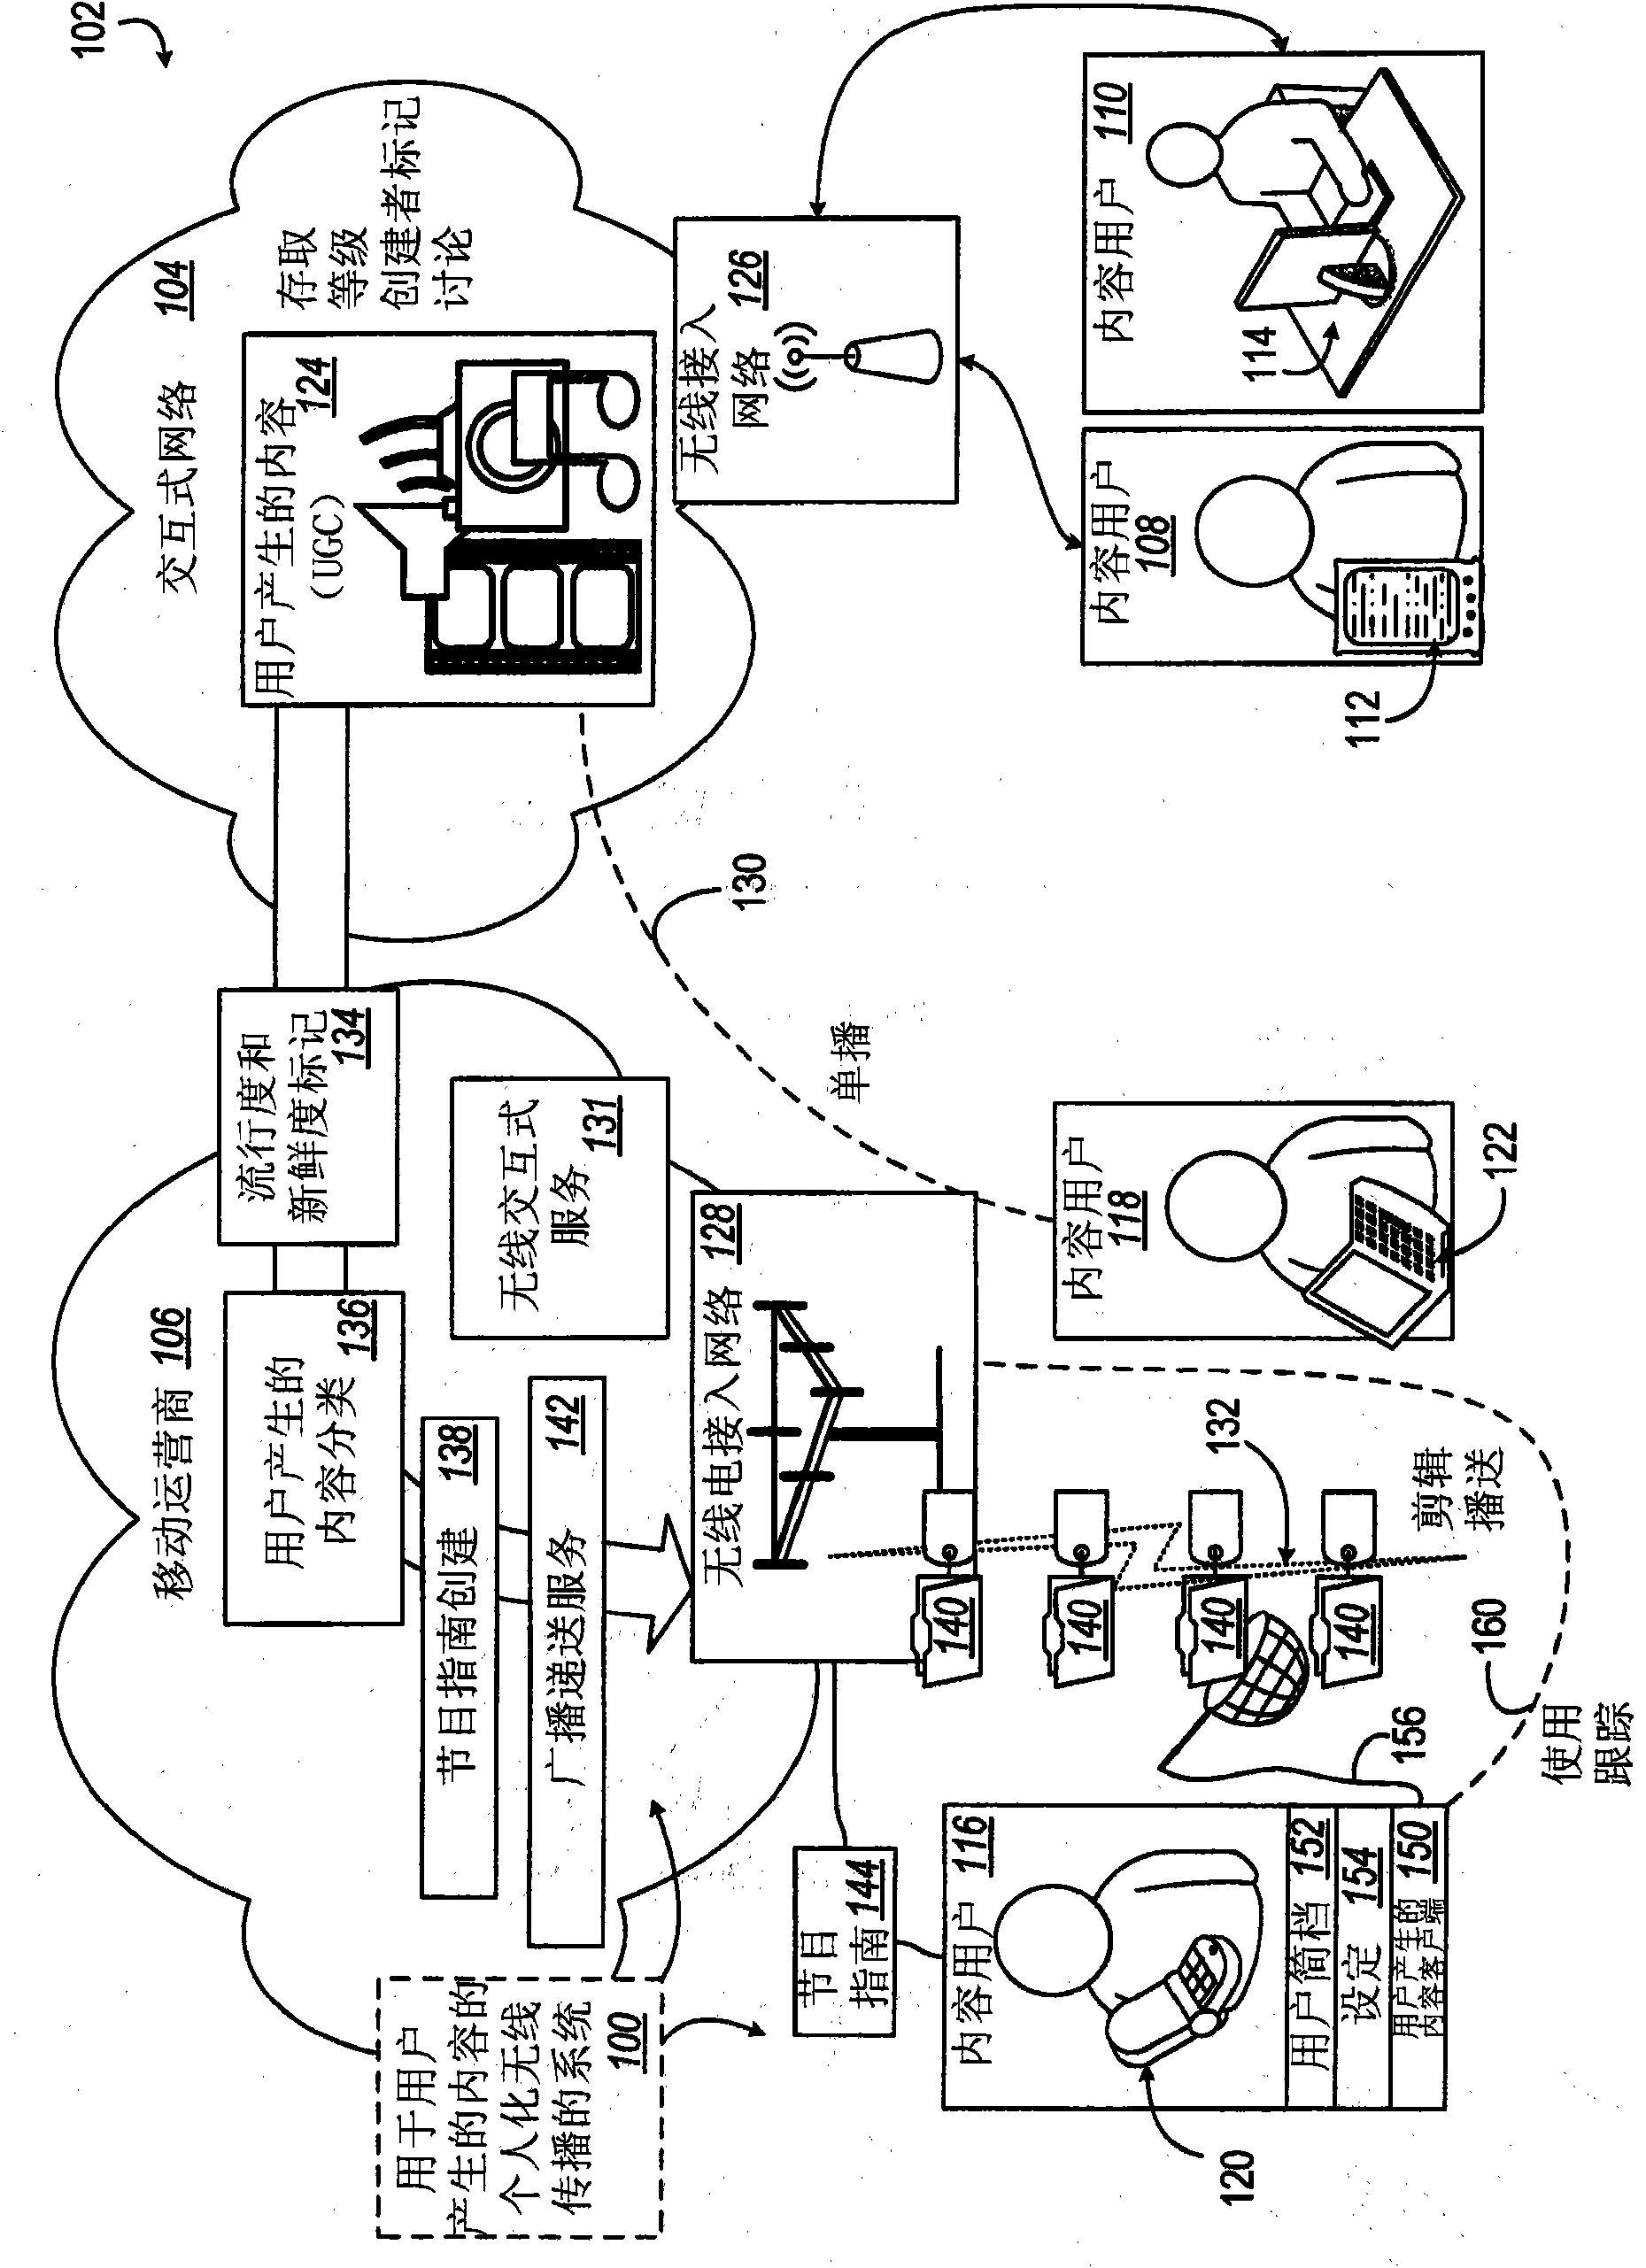 Method and apparatus for enhancing support for user-generated content delivery